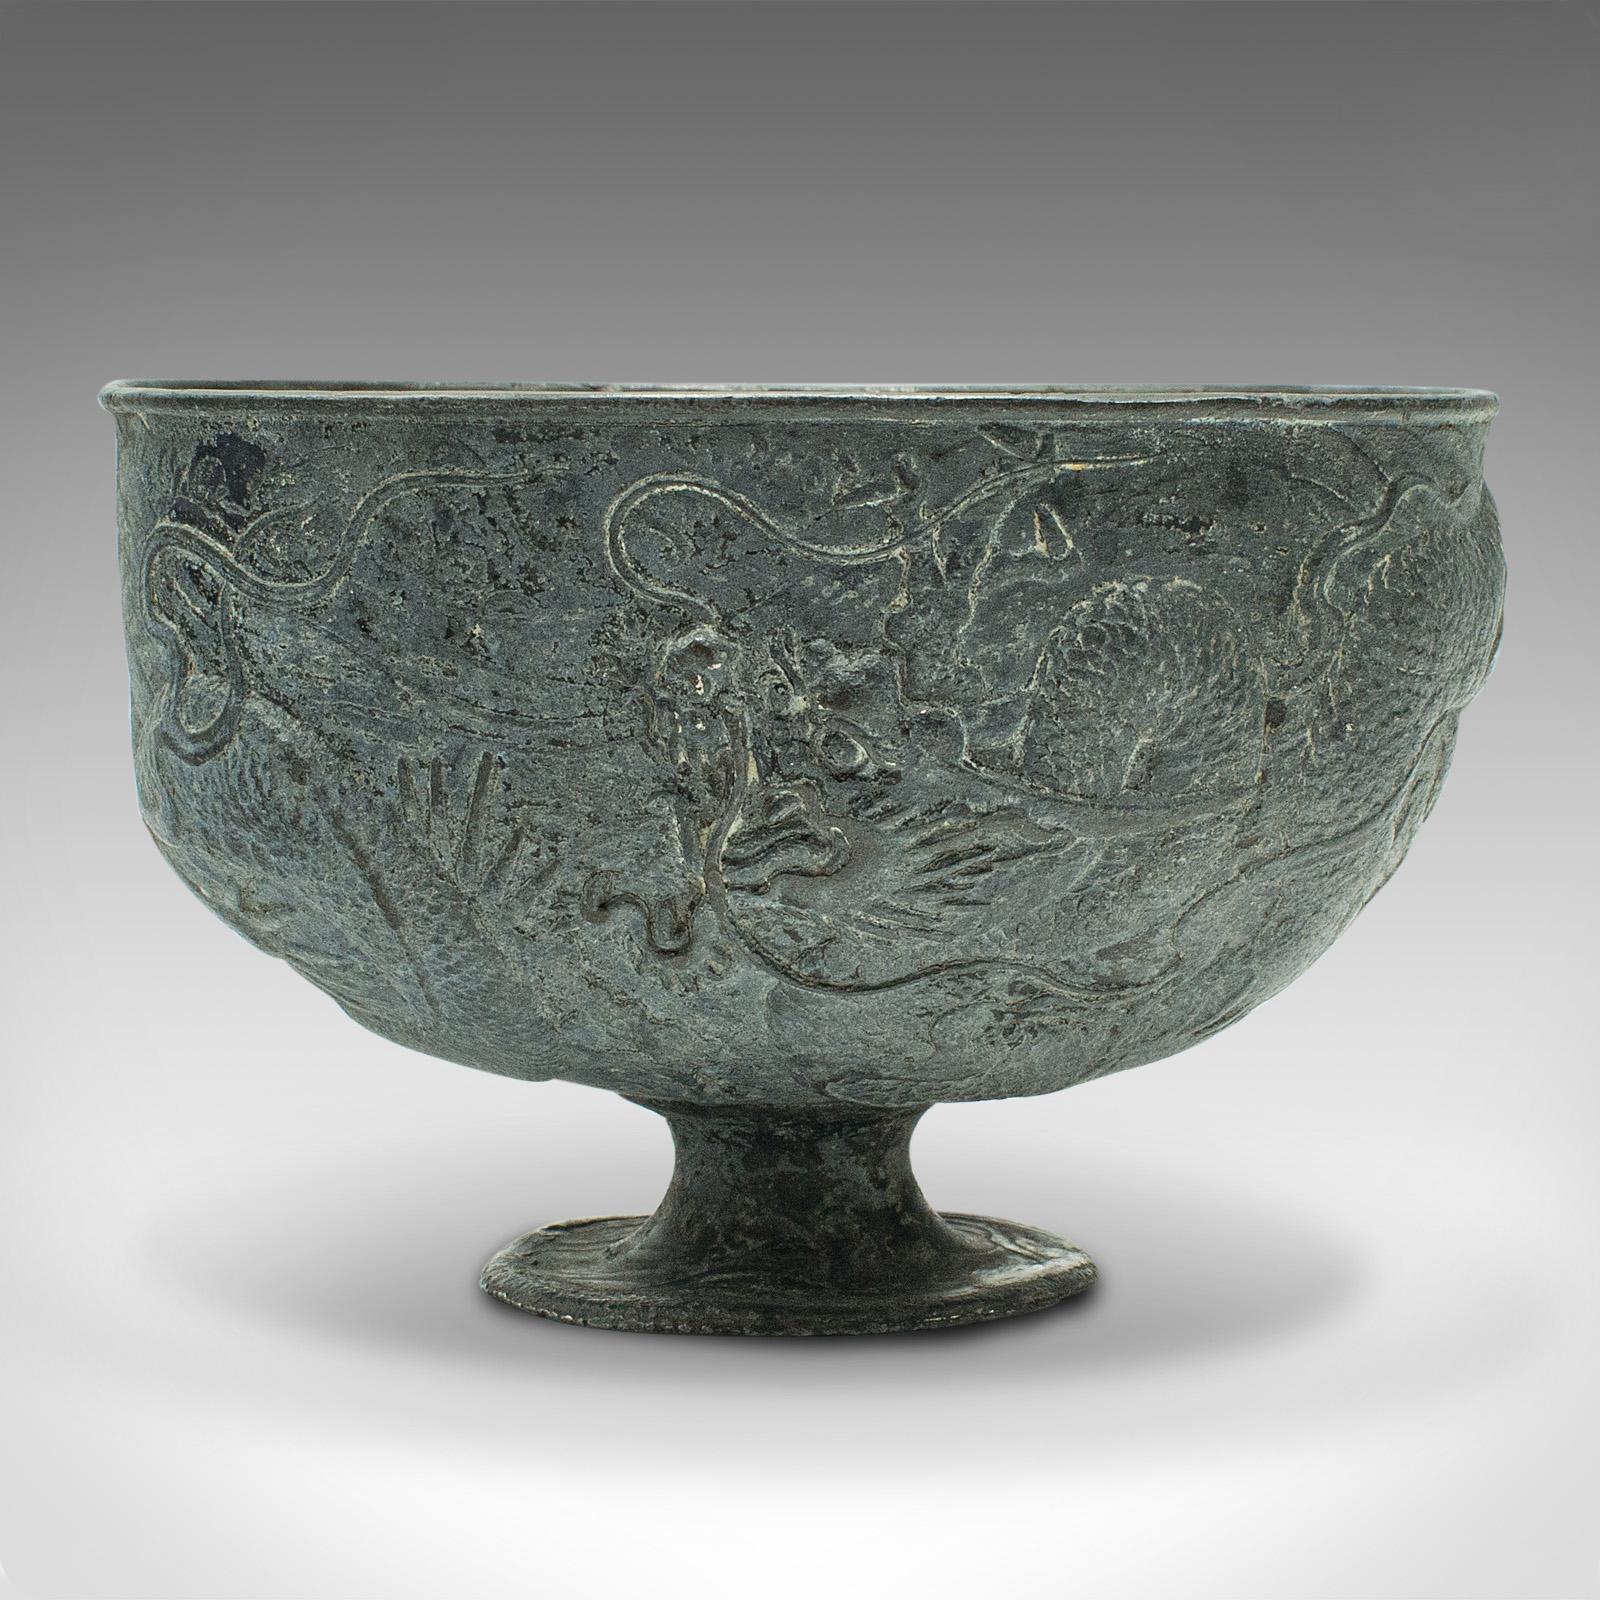 19th Century Antique Libation Cup, Chinese, Lead Alloy, Decorative Bowl, Victorian, C.1880 For Sale